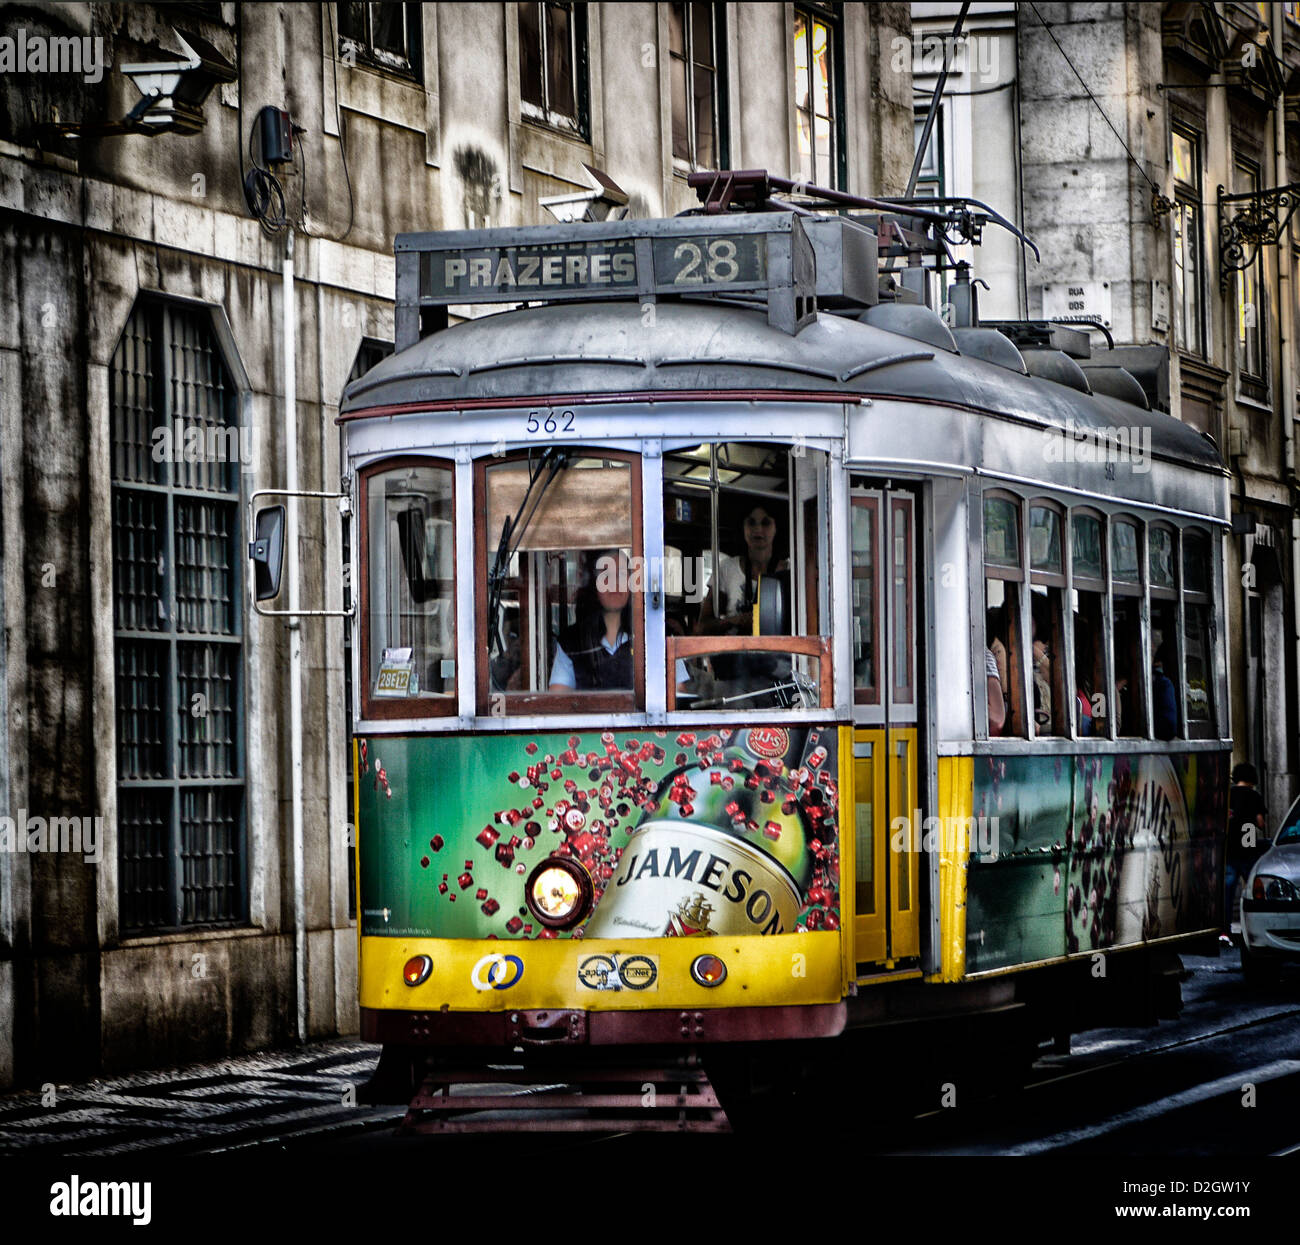 An old Lisbon tram with post photography work to enhance pictorial qualities. Stock Photo